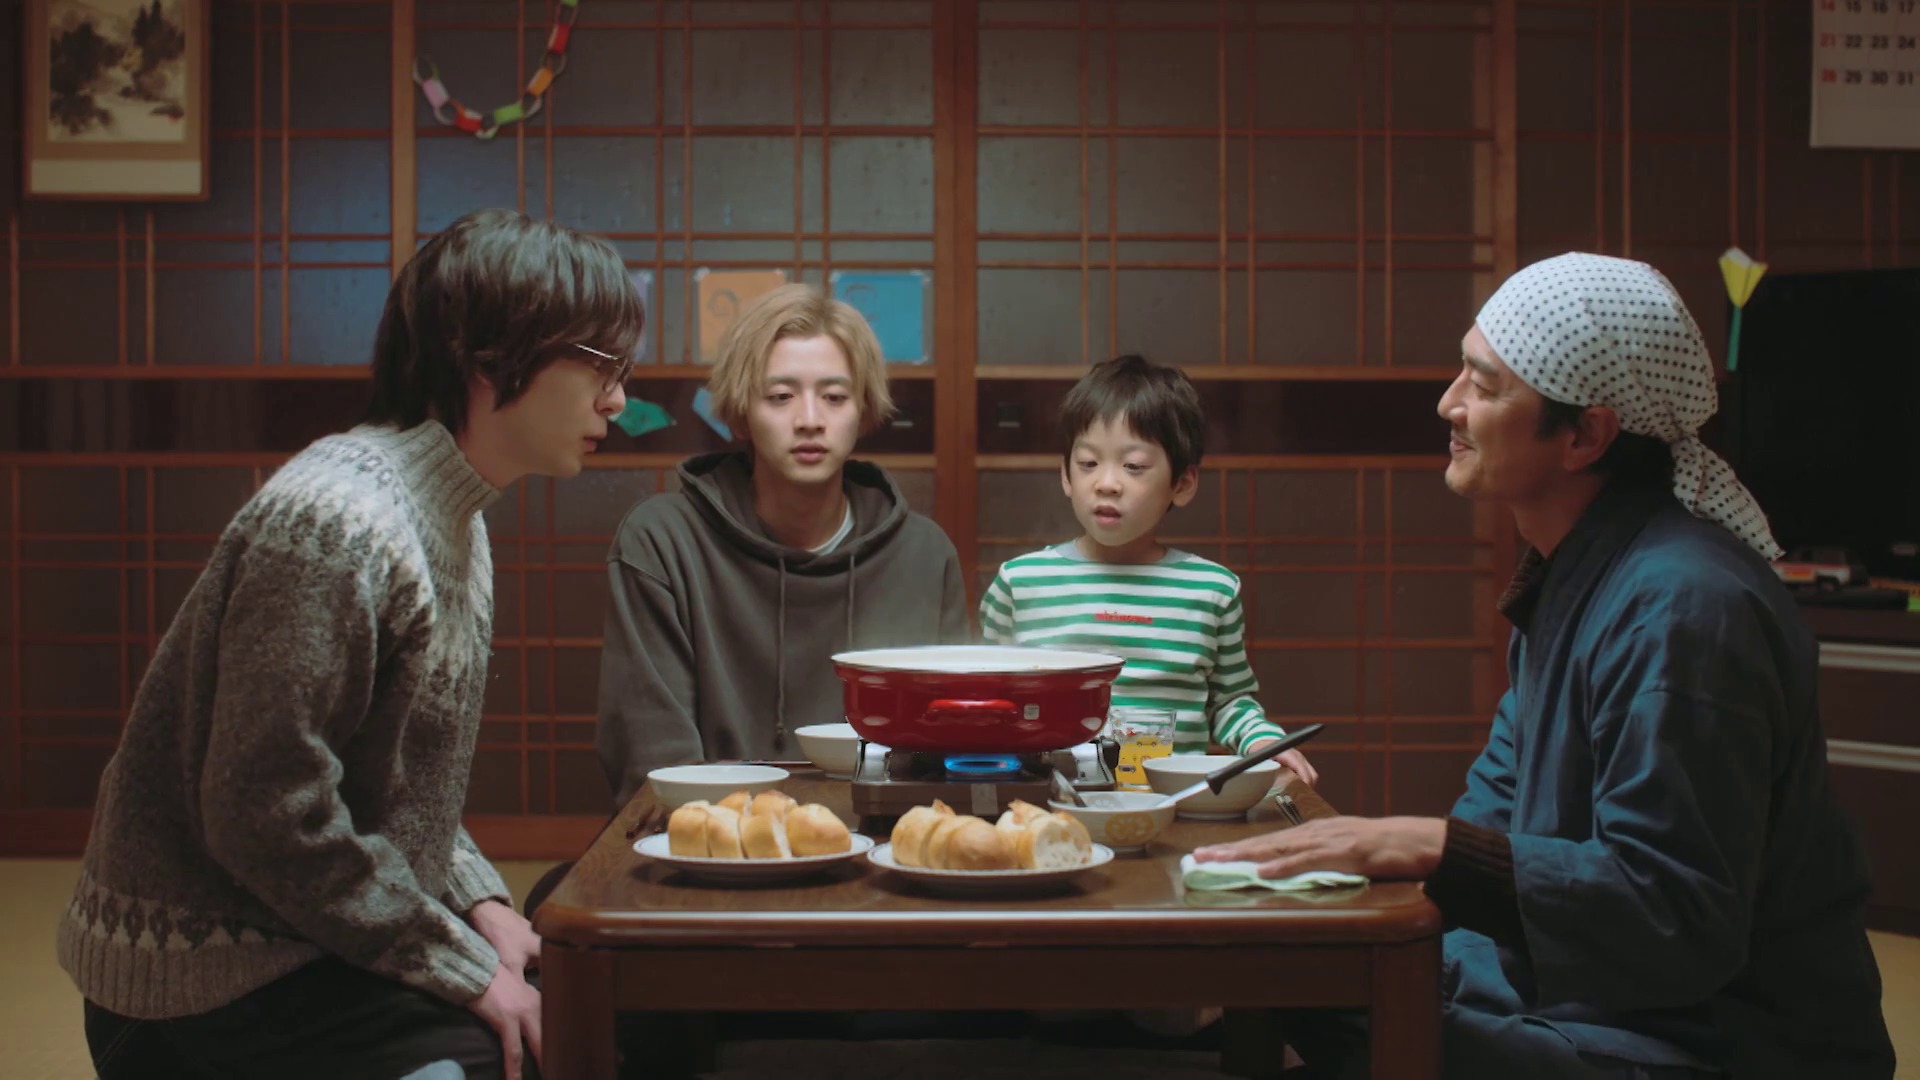 Our Dining Table  – Final – Episode 10 – Recap and Review